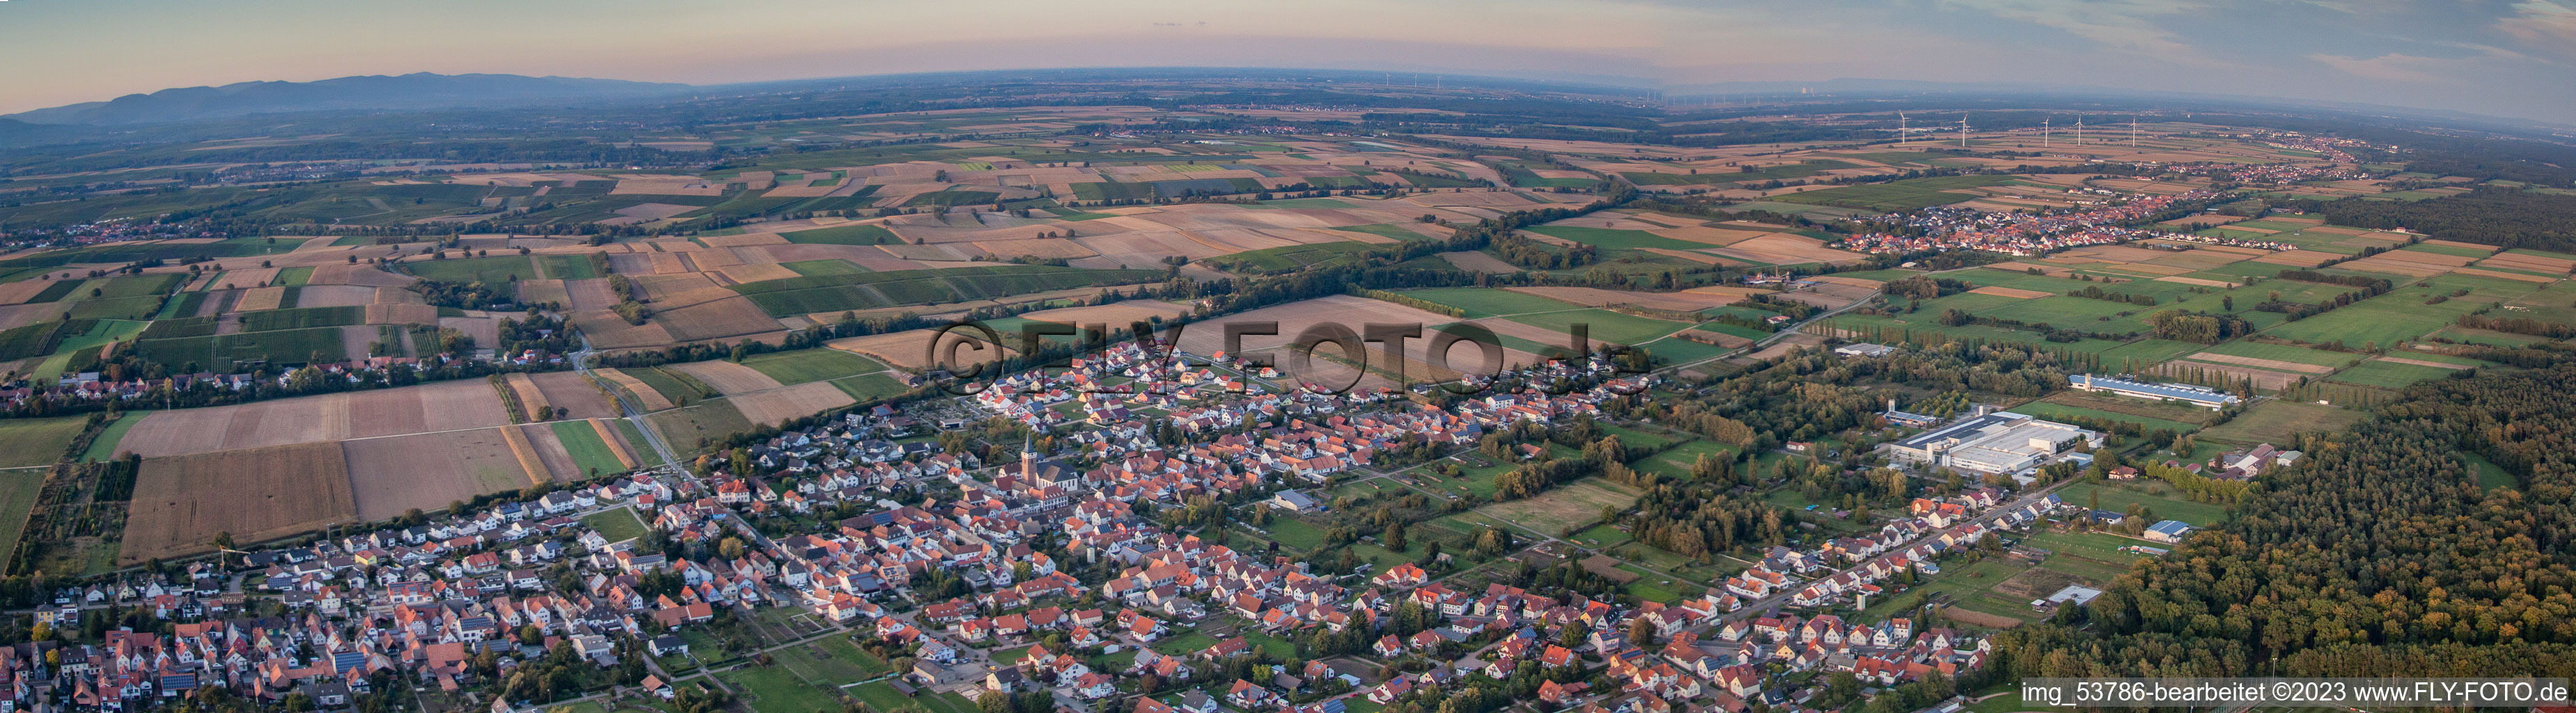 Aerial view of Panorama in the district Schaidt in Wörth am Rhein in the state Rhineland-Palatinate, Germany